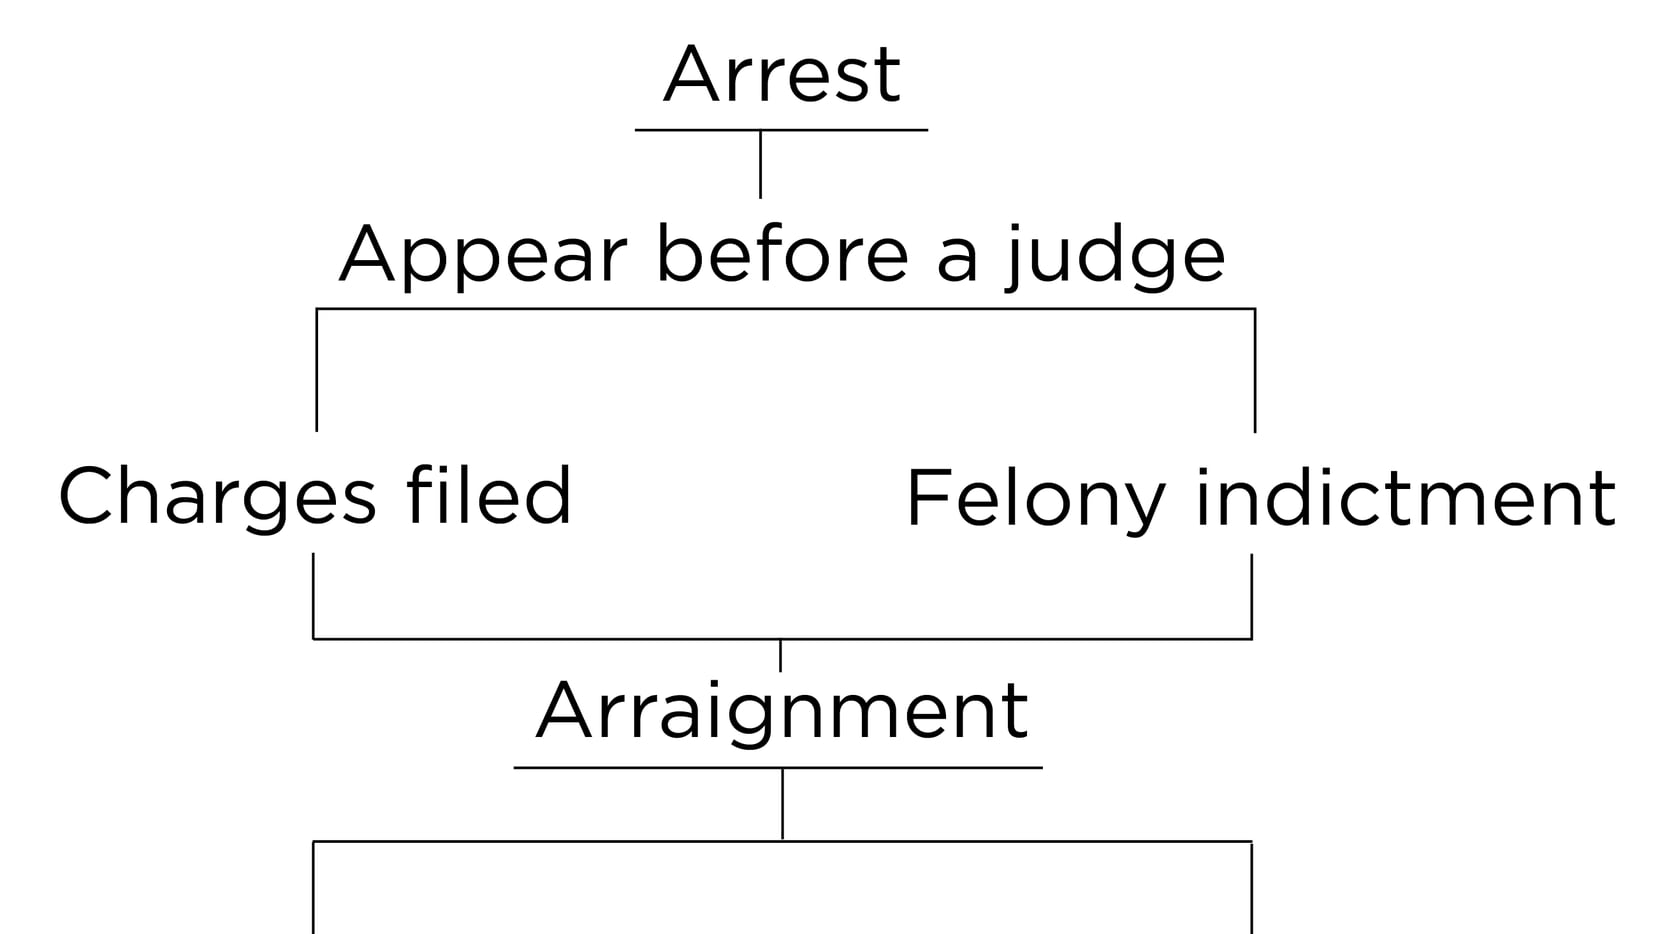 Arraignment meaning